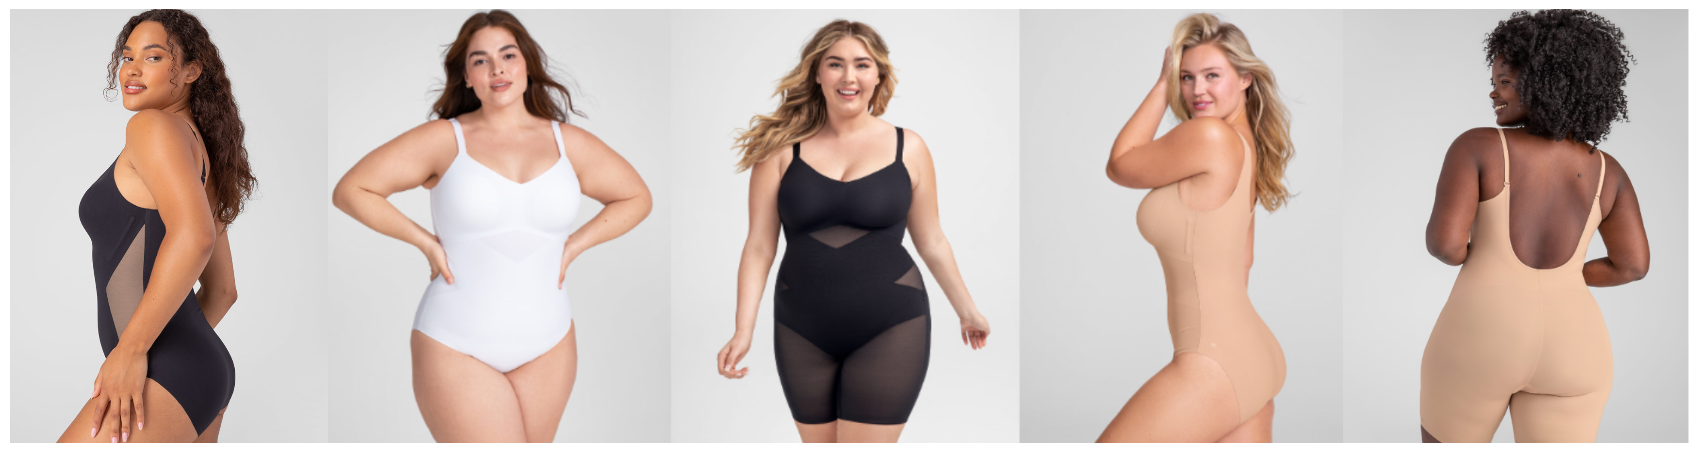 I'm in between sizes in Honeylove Bodysuits, what do you recommend